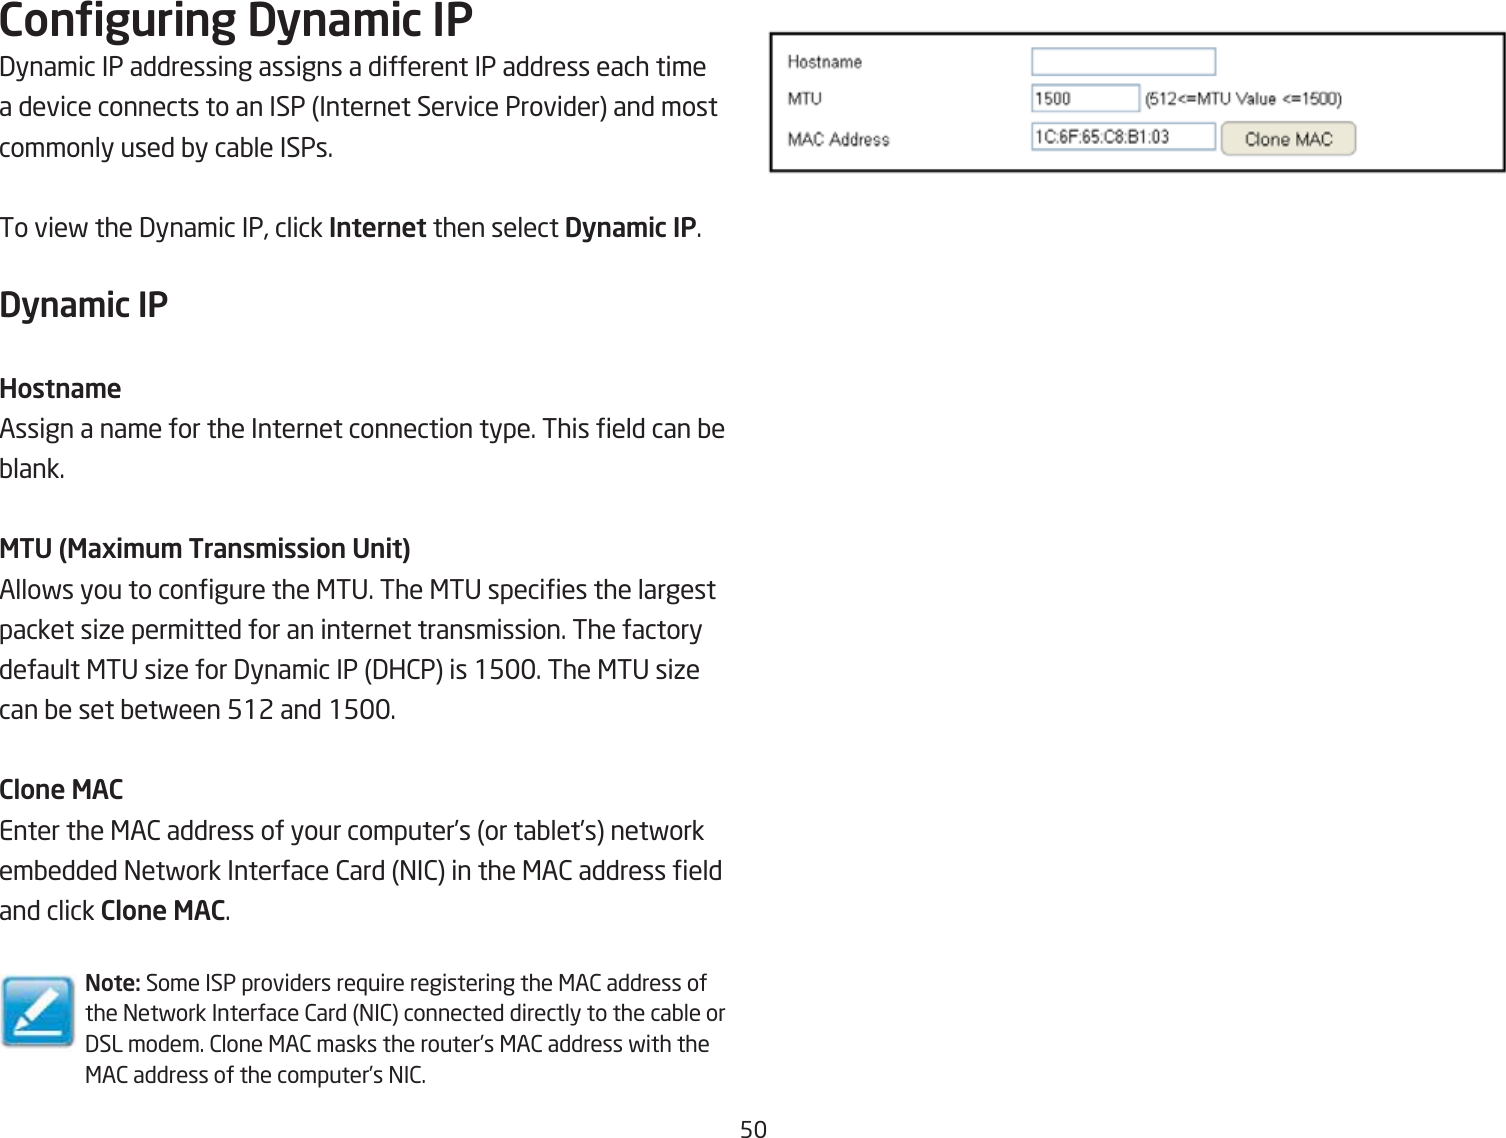 5Conguring Dyna\ic IP3ynamic IP addressing assigns a different IP address each time a device connects to an ISP Internet Service Provider and most commonly used Qy caQle ISPs.To vief the 3ynamic IP, click Internet then select Dyna\ic IP.Dyna\ic IPHostna\eAssign a name for the Internet connection type. This eld can Qe Qlank.MTU (Maxi\u\ Trans\ission Unit)Allofs you to congure the &lt;TU. The &lt;TU species the largest packet siie permitted for an internet transmission. The factory default &lt;TU siie for 3ynamic IP 3H2P is 15. The &lt;TU siie can Qe set Qetfeen 512 and 15.Clone MACEnter the &lt;A2 address of your computer’s or taQlet’s netfork emQedded =etfork Interface 2ard =I2 in the &lt;A2 address eld and click Clone MAC.Note: Some ISP providers re`uire registering the &lt;A2 address of the =etfork Interface 2ard =I2 connected directly to the caQle or 3SL modem. 2lone &lt;A2 masks the routers &lt;A2 address fith the &lt;A2 address of the computer’s =I2.